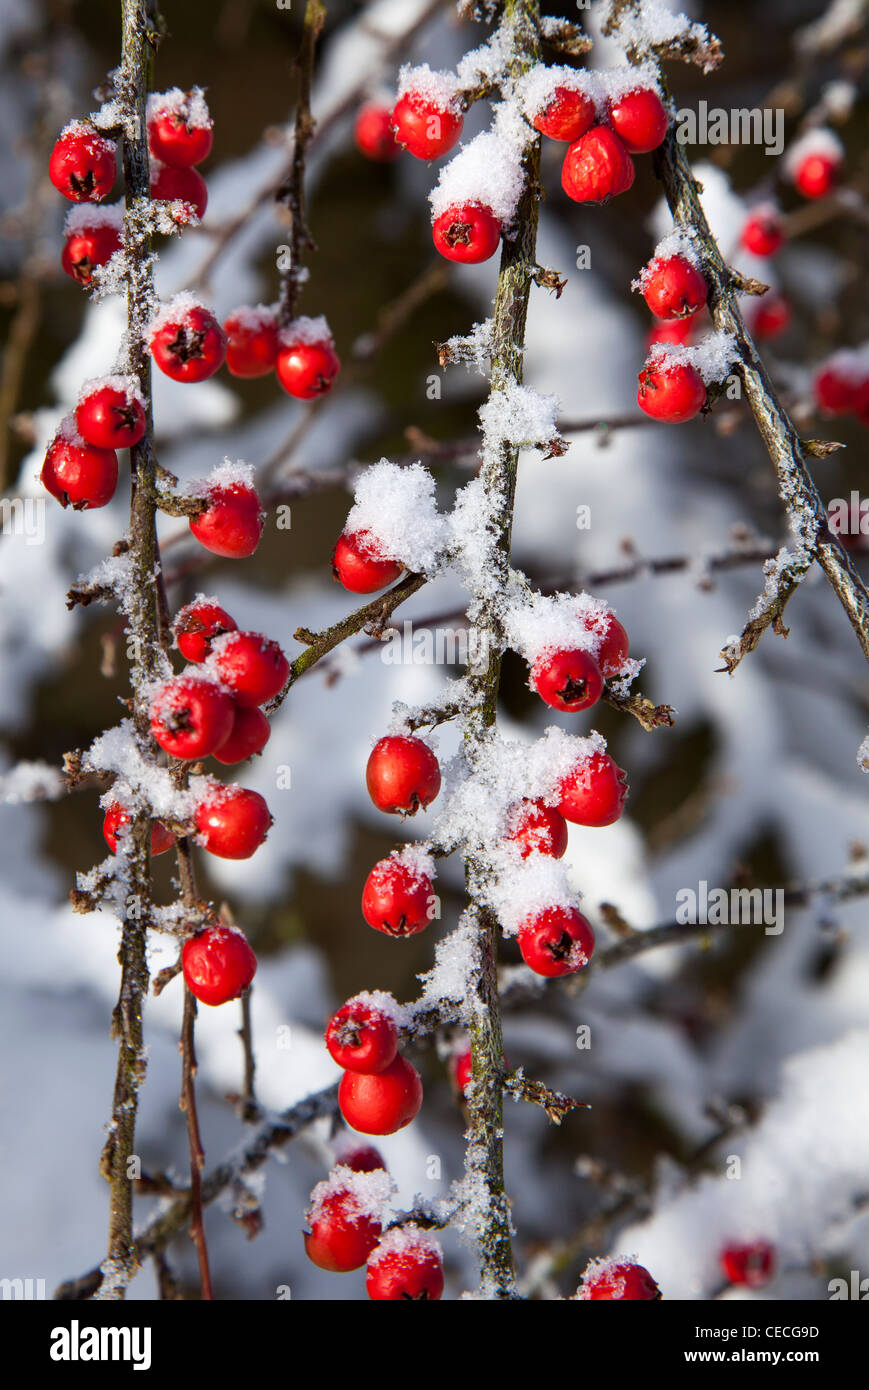 Cotoneaster berries with a dusting of snow Stock Photo